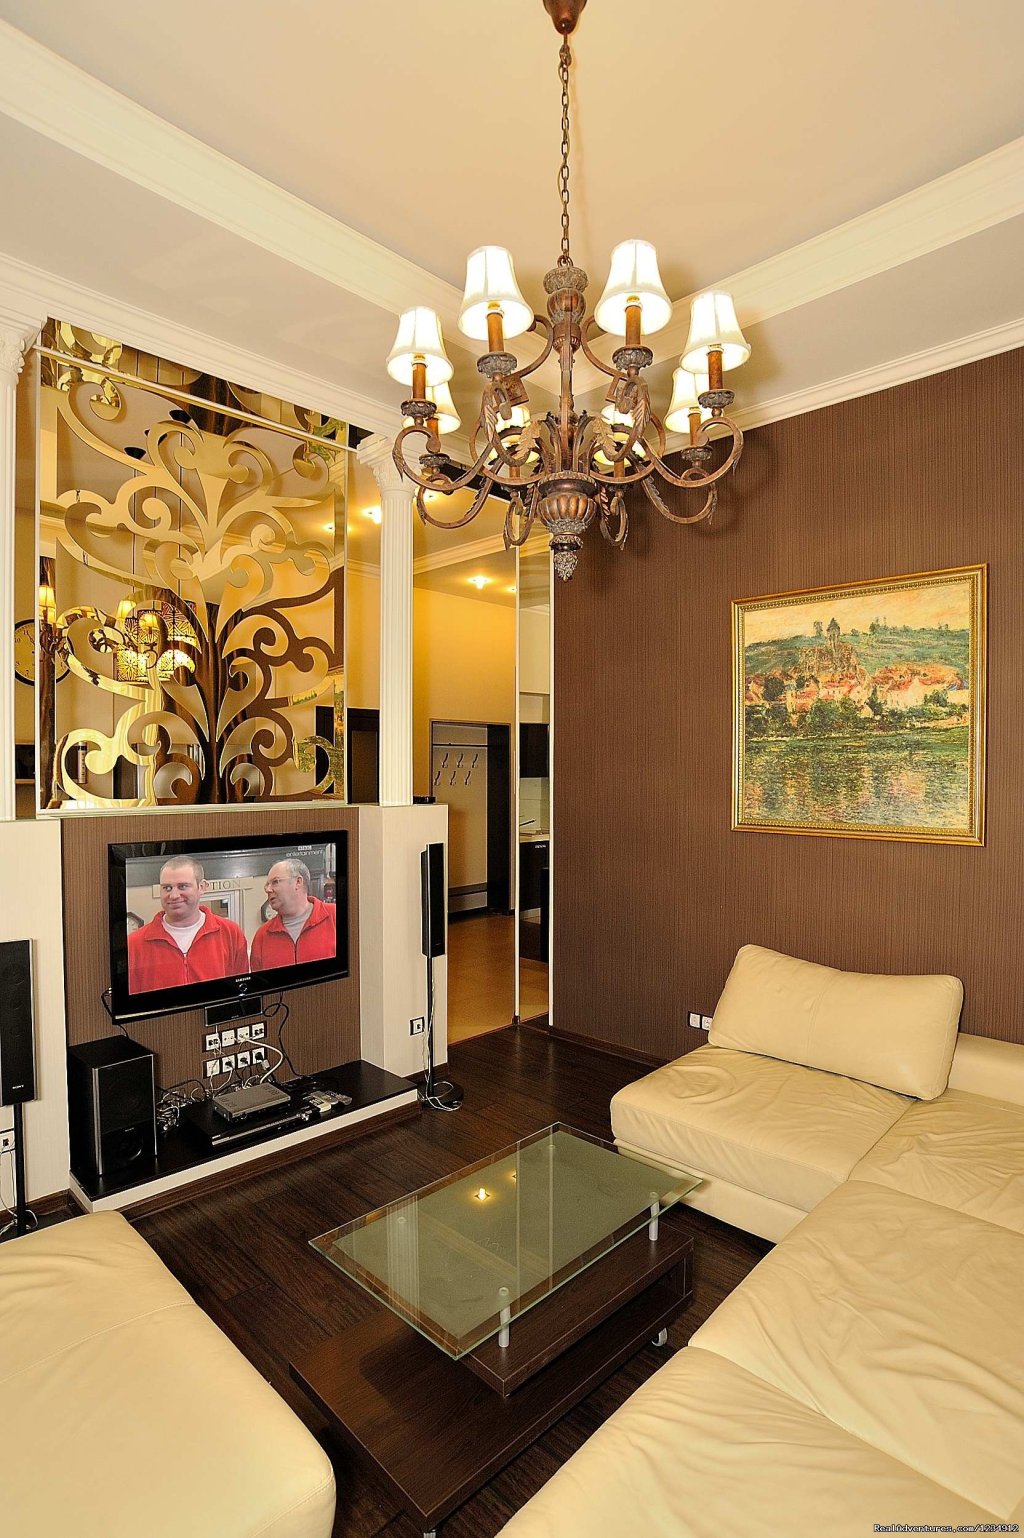 VIP 3room/2 bedroom apartment in the heart of Kiev | Image #9/24 | 